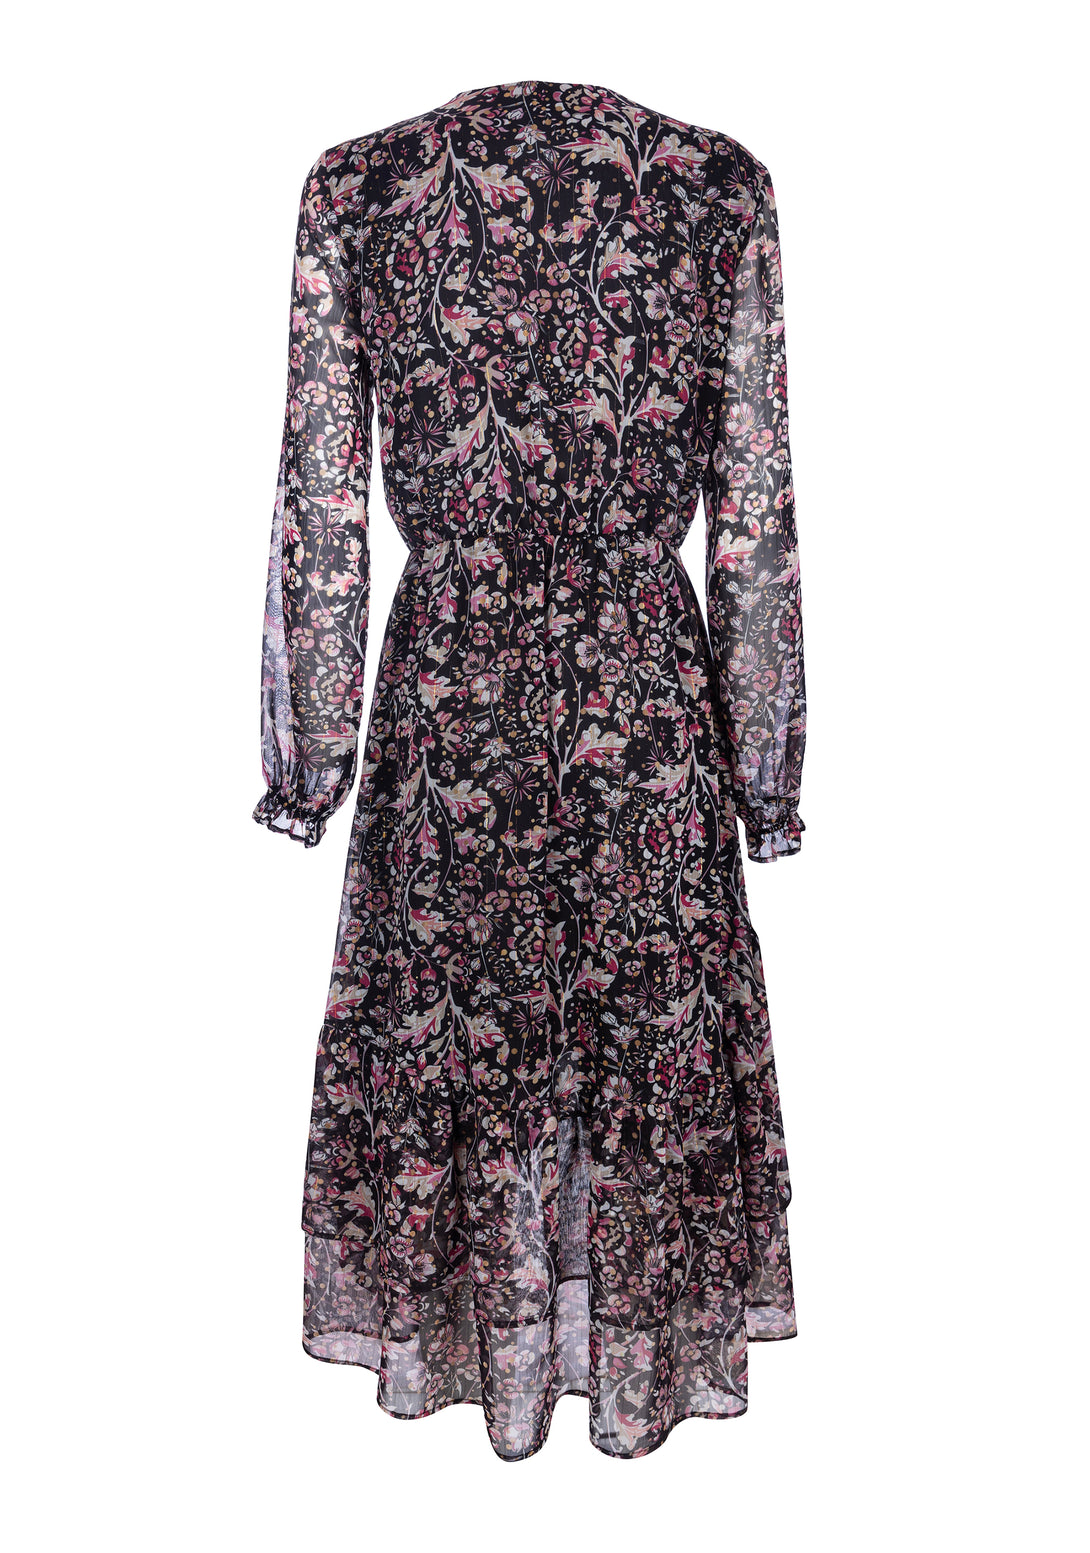 Wrap dress regular fit with flowery pattern